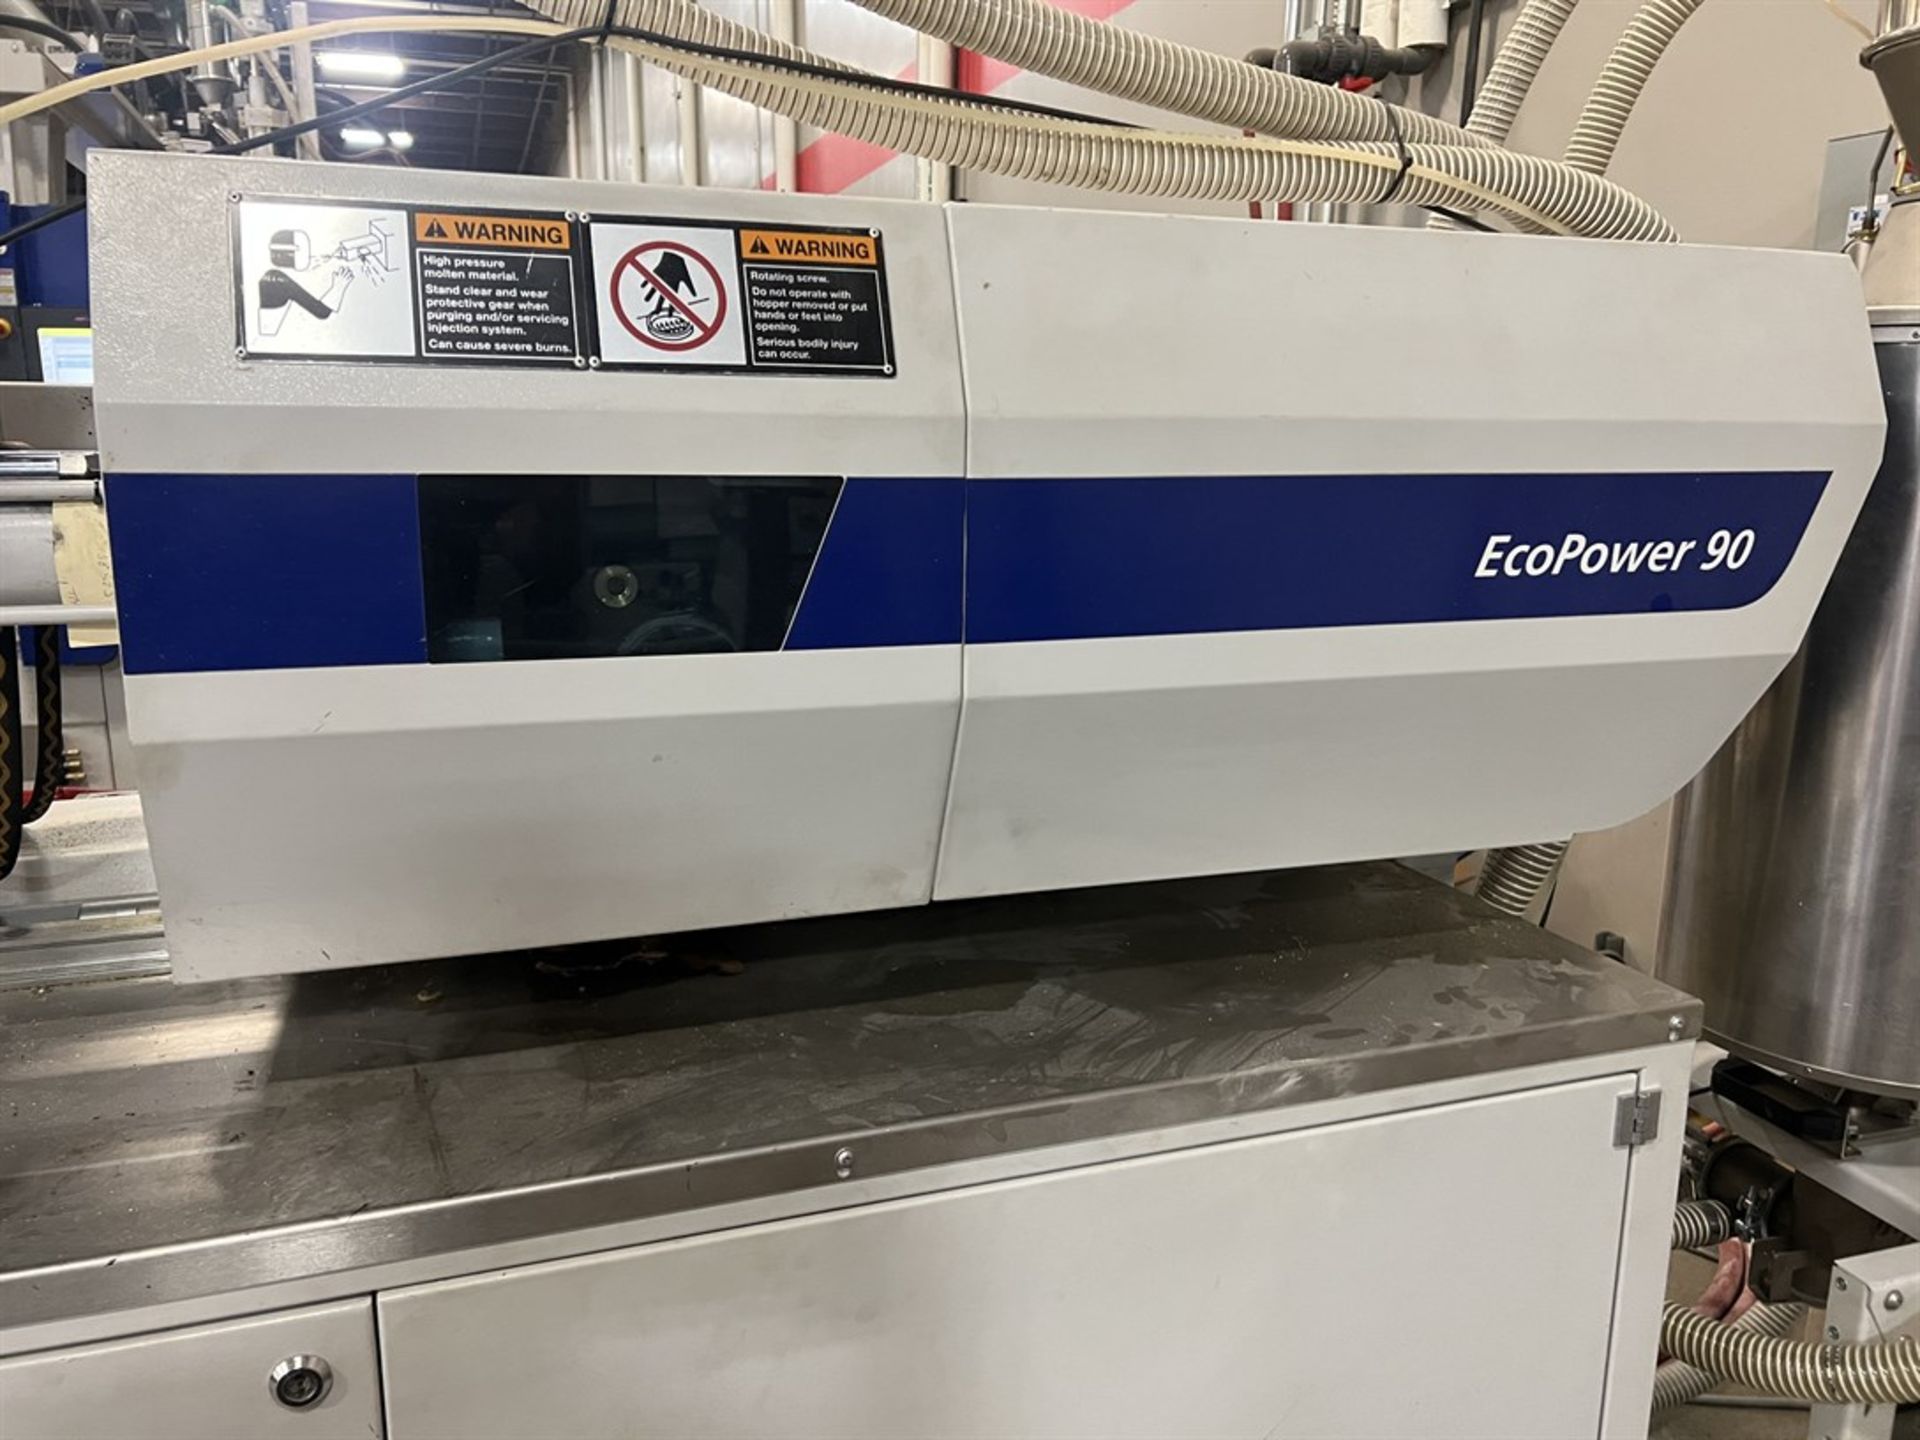 (PRESS ONLY) 2015 WITTMANN BATTENFELD ECOPOWER 90/350 All Electric 90 Ton Injection Molder, s/n 1365 - Image 7 of 7